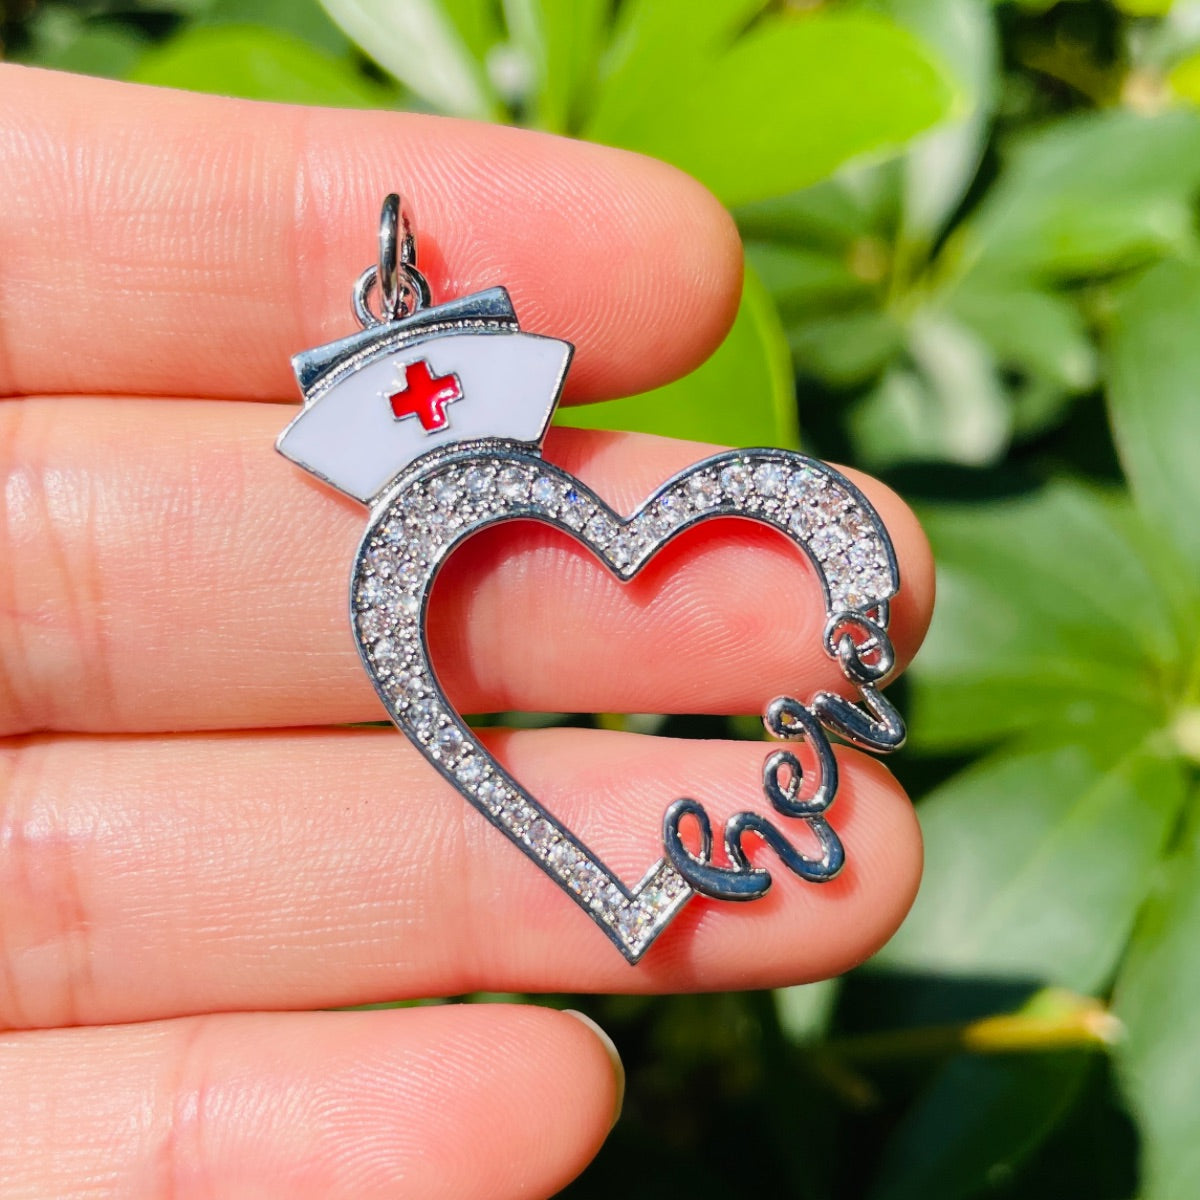 10pcs/lot 33*30mm CZ Pave Nurse Cap Heart Hero Word Charms Silver CZ Paved Charms New Charms Arrivals Nurse Inspired Charms Beads Beyond